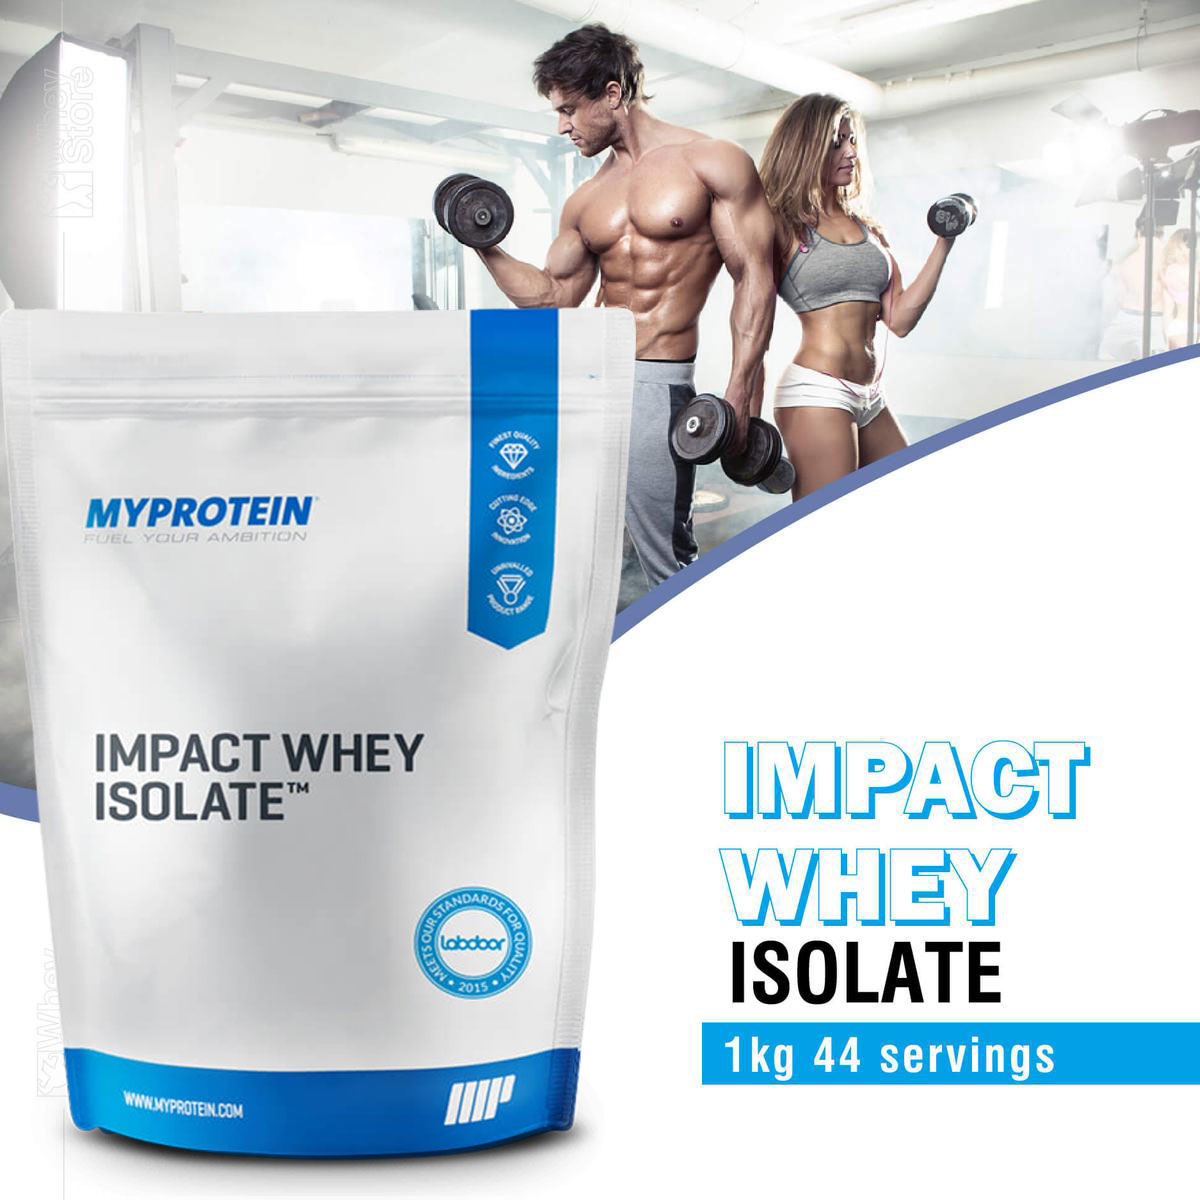 Impact Whey Isolate 1Kg (40 servings) - Sữa Tăng Cơ Giảm Mỡ